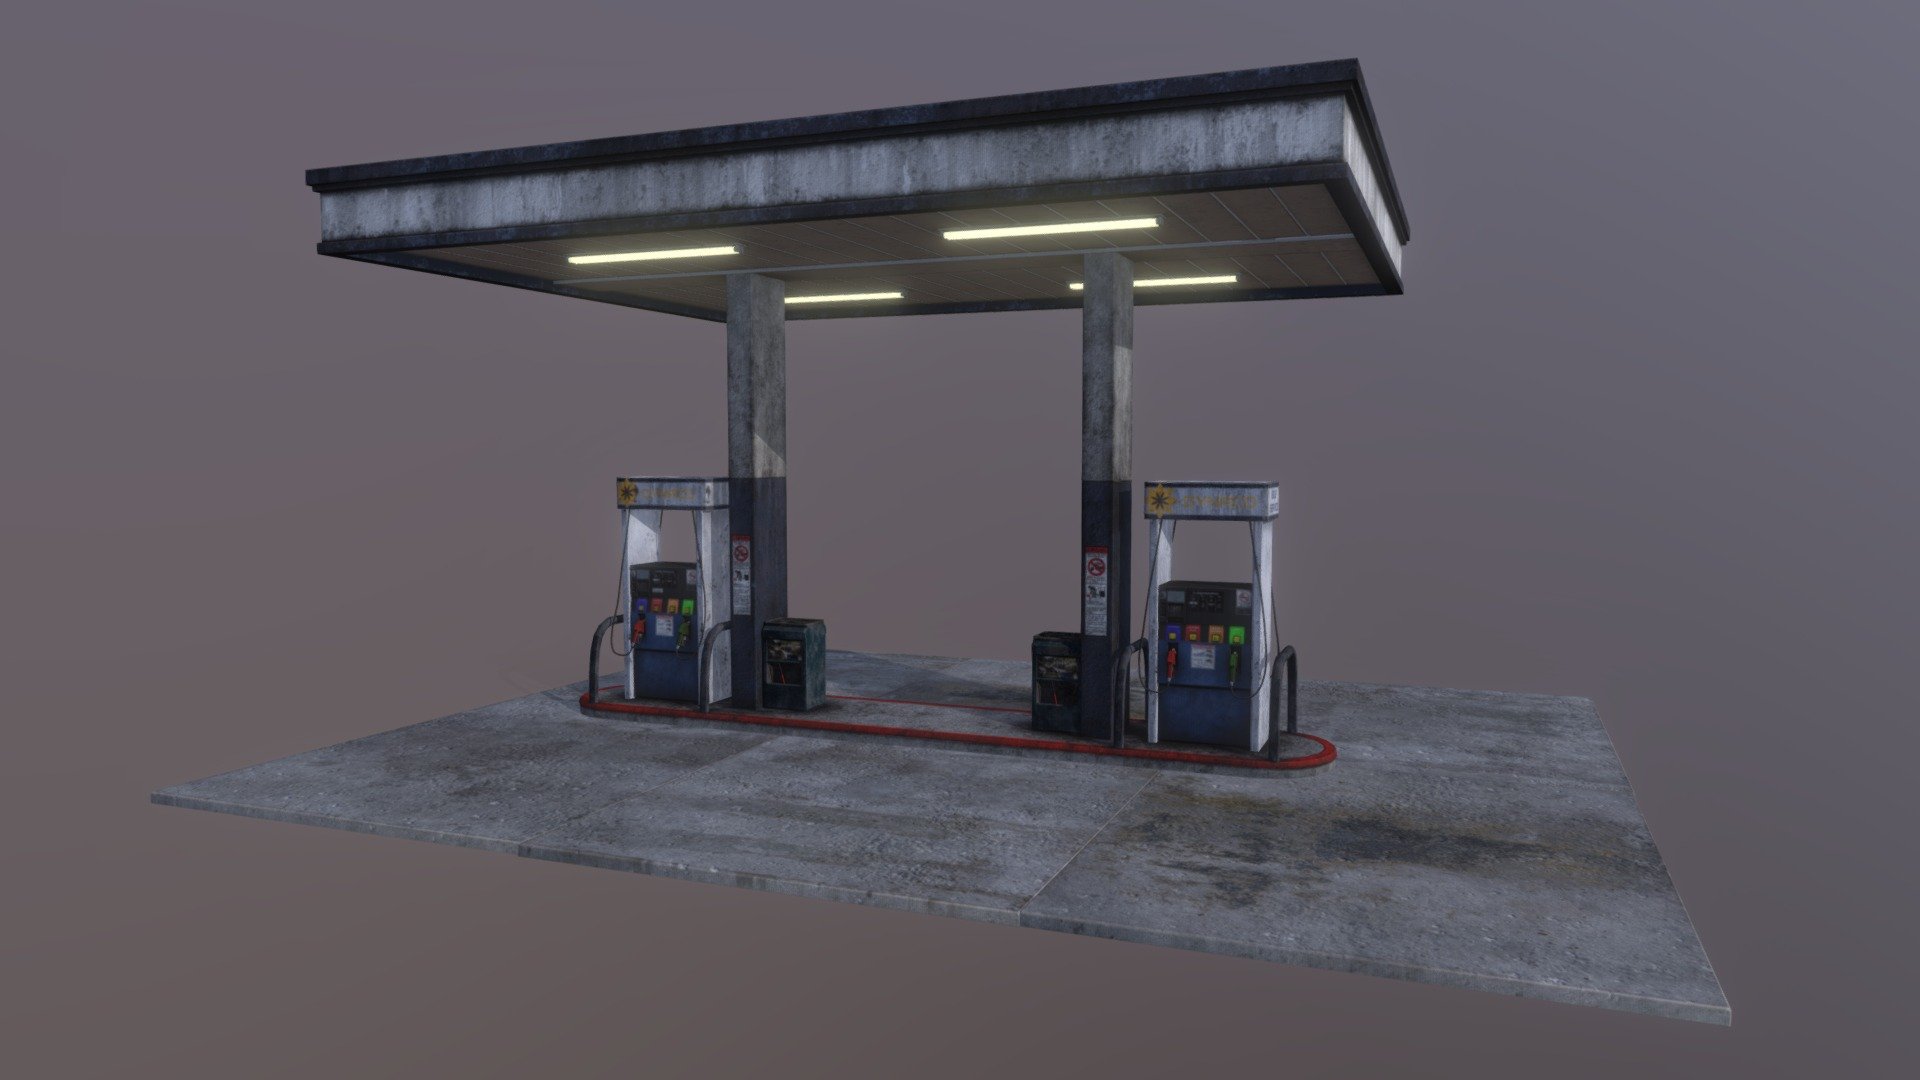 Gas Station Canopy with Fuel Pumps